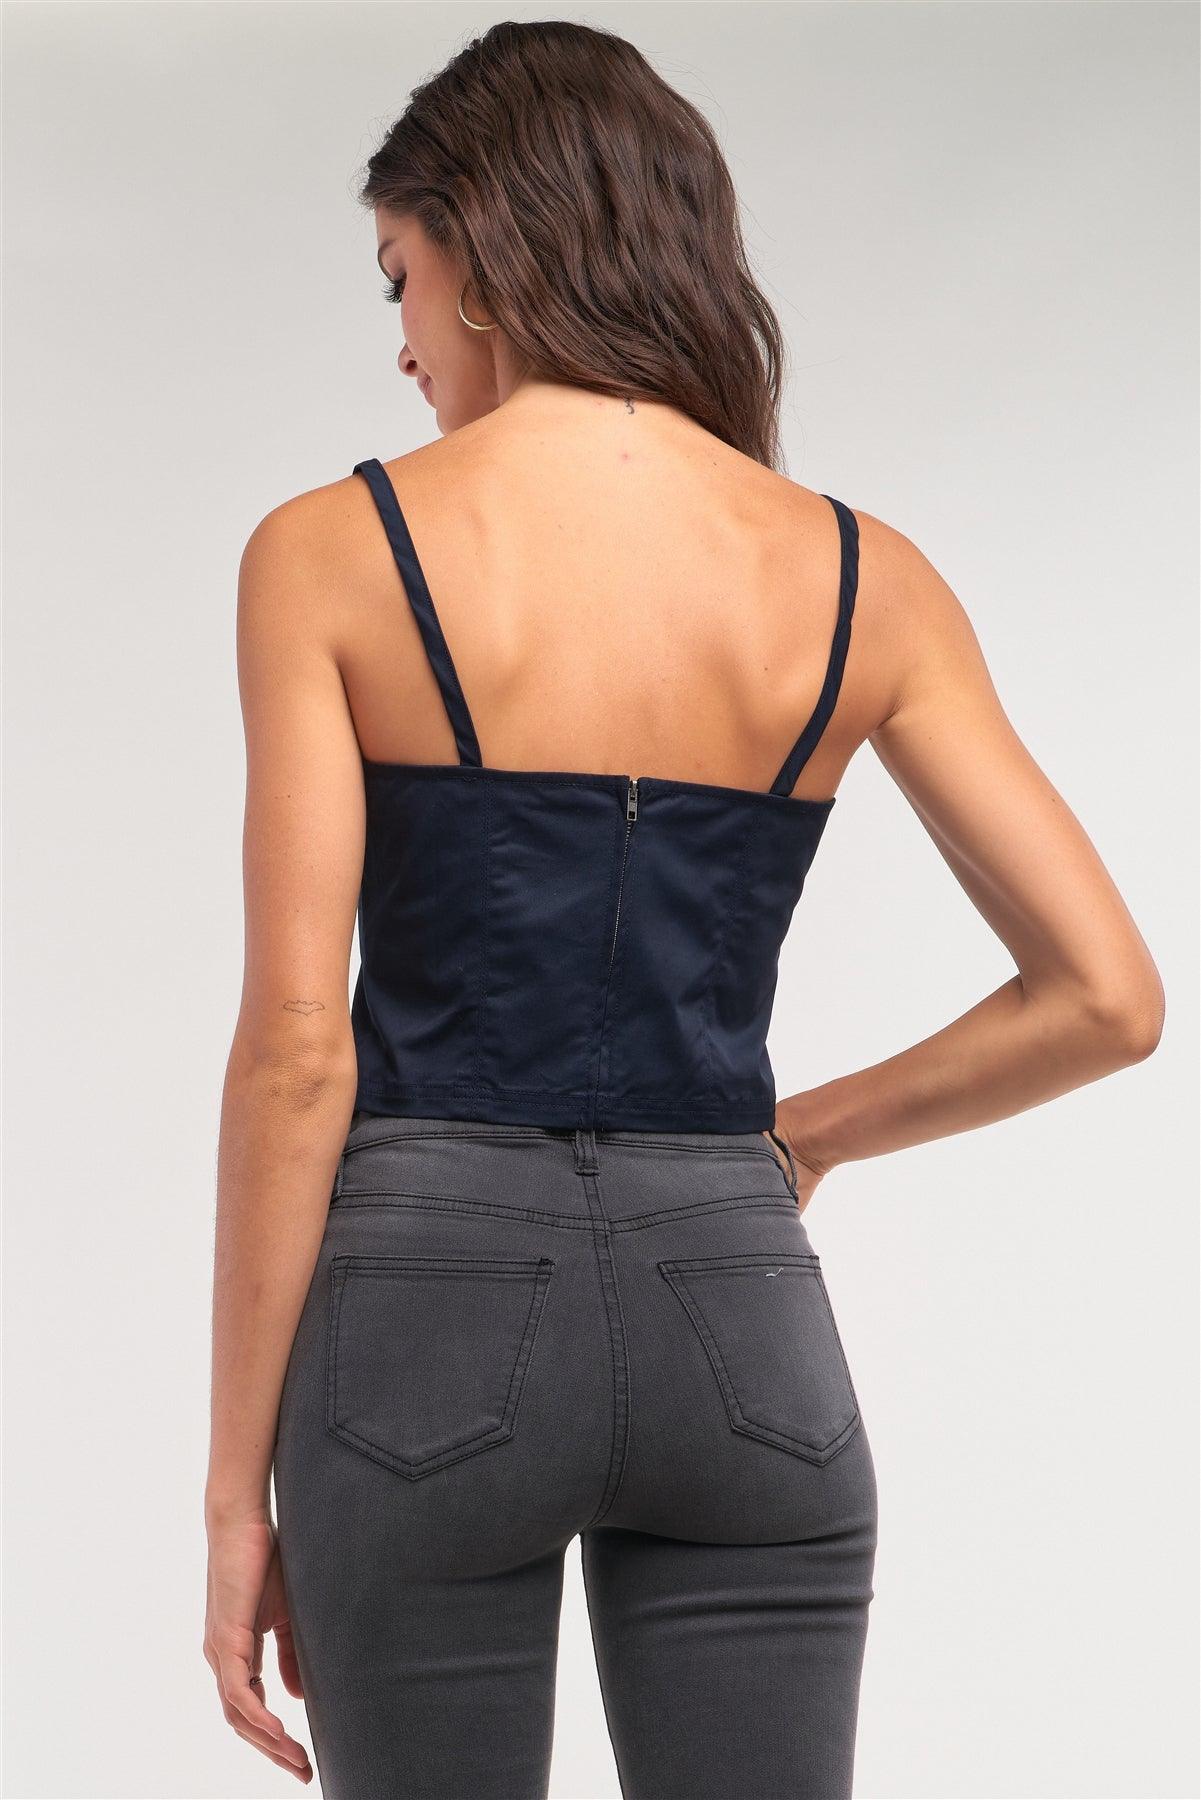 Navy Sleeveless Square Neck Back Zipper Closure Cropped Top /1-2-2-1